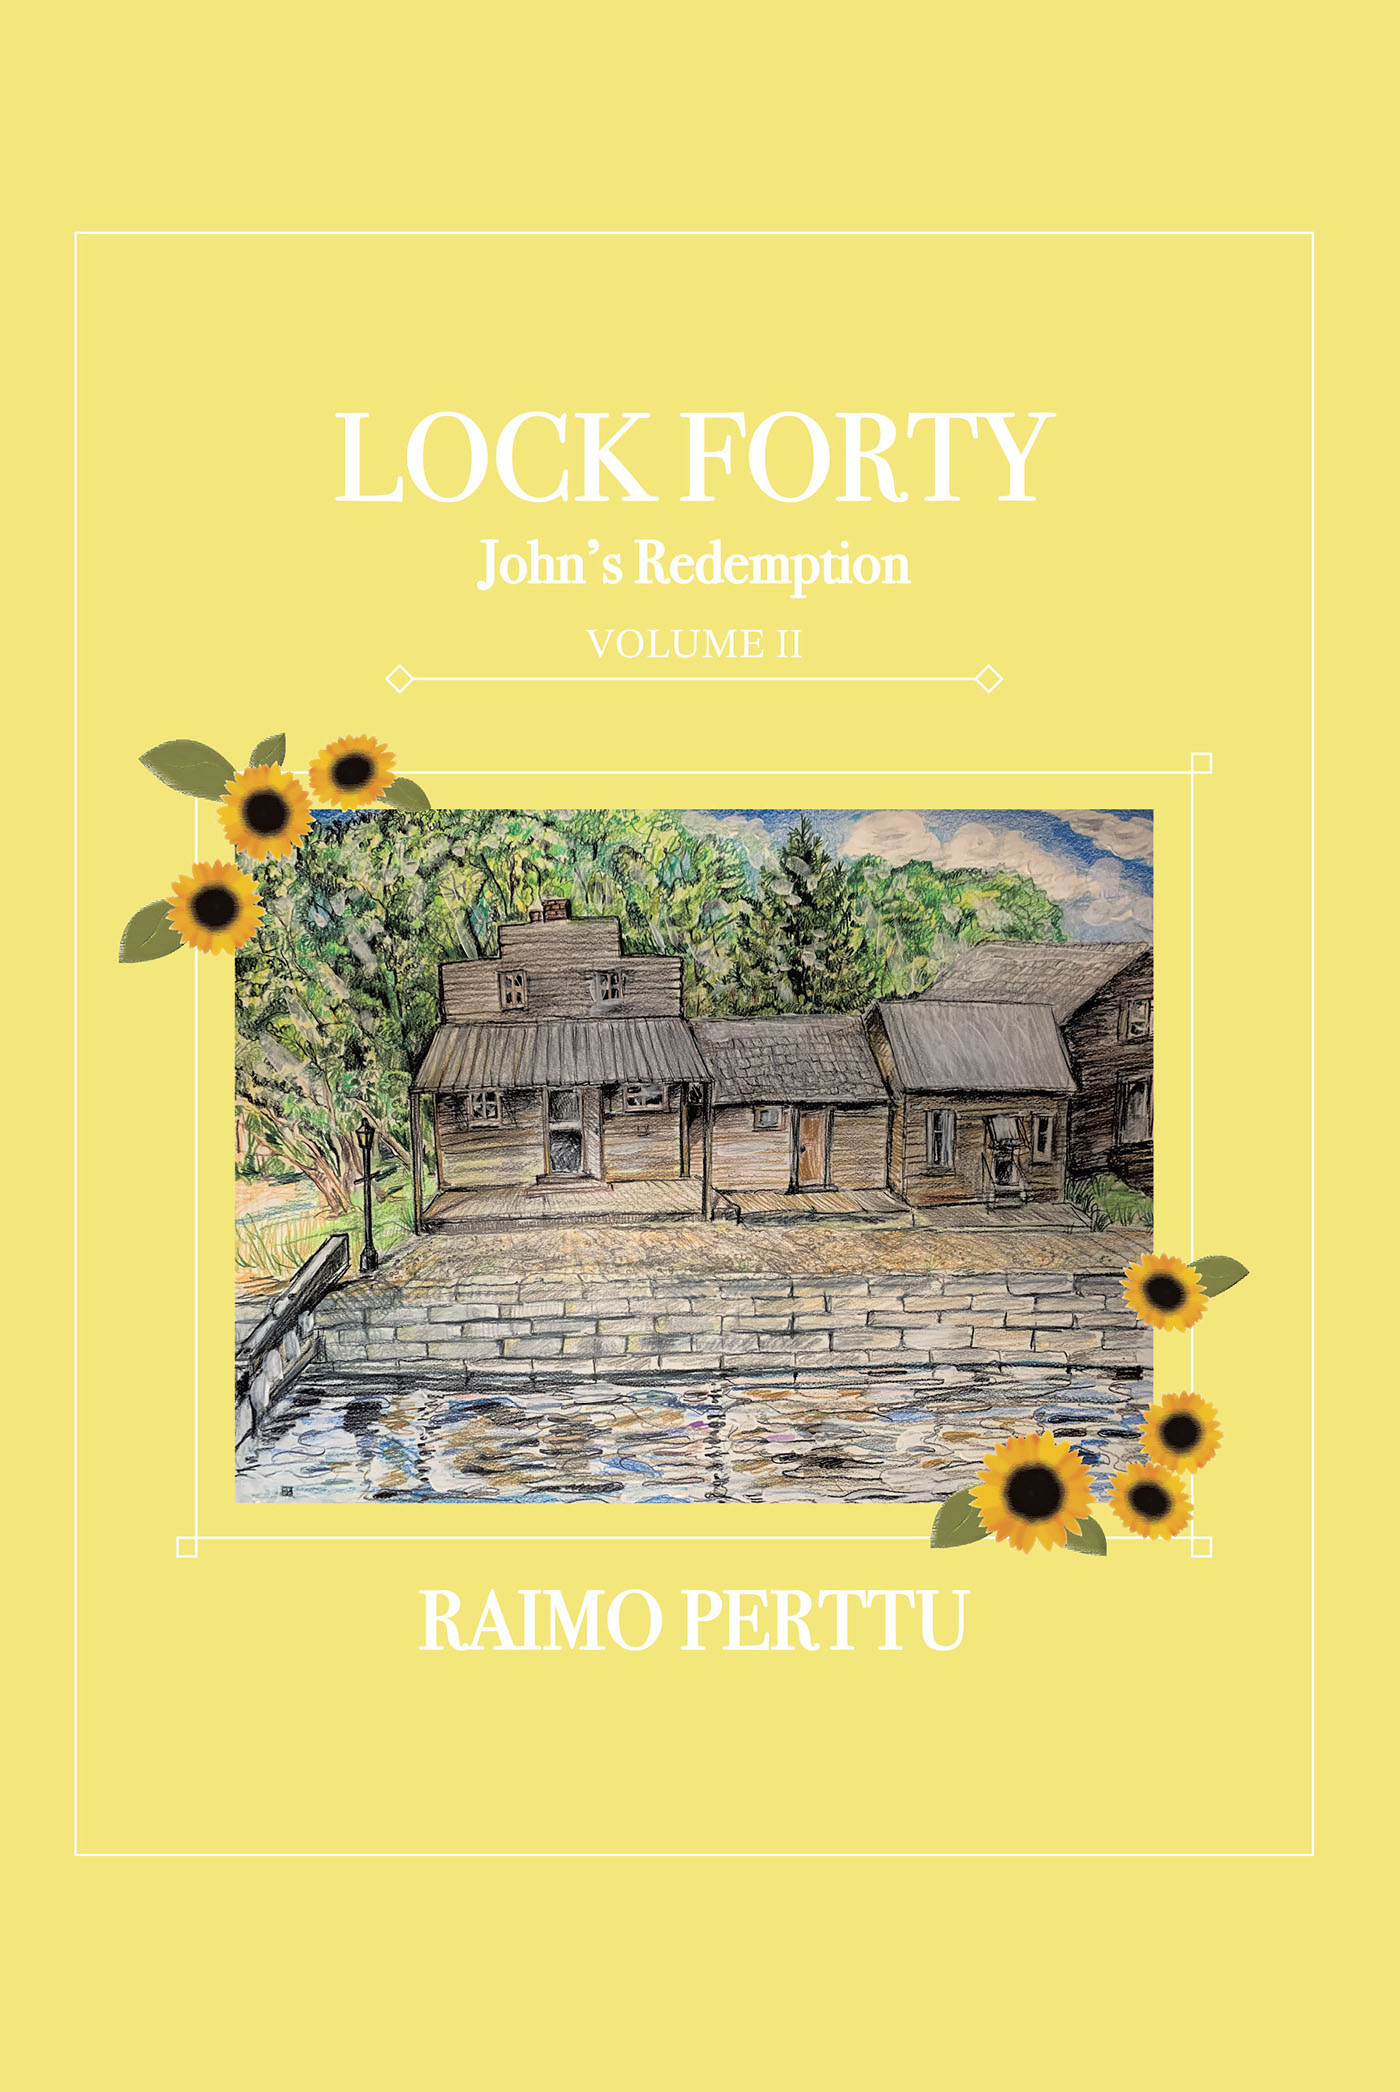 Raimo Perttu’s New Book, "Lock Forty Volume II: John's Redemption," is a Captivating Exploration Into the Tumultuous Love Life of a Canal Boat Operator